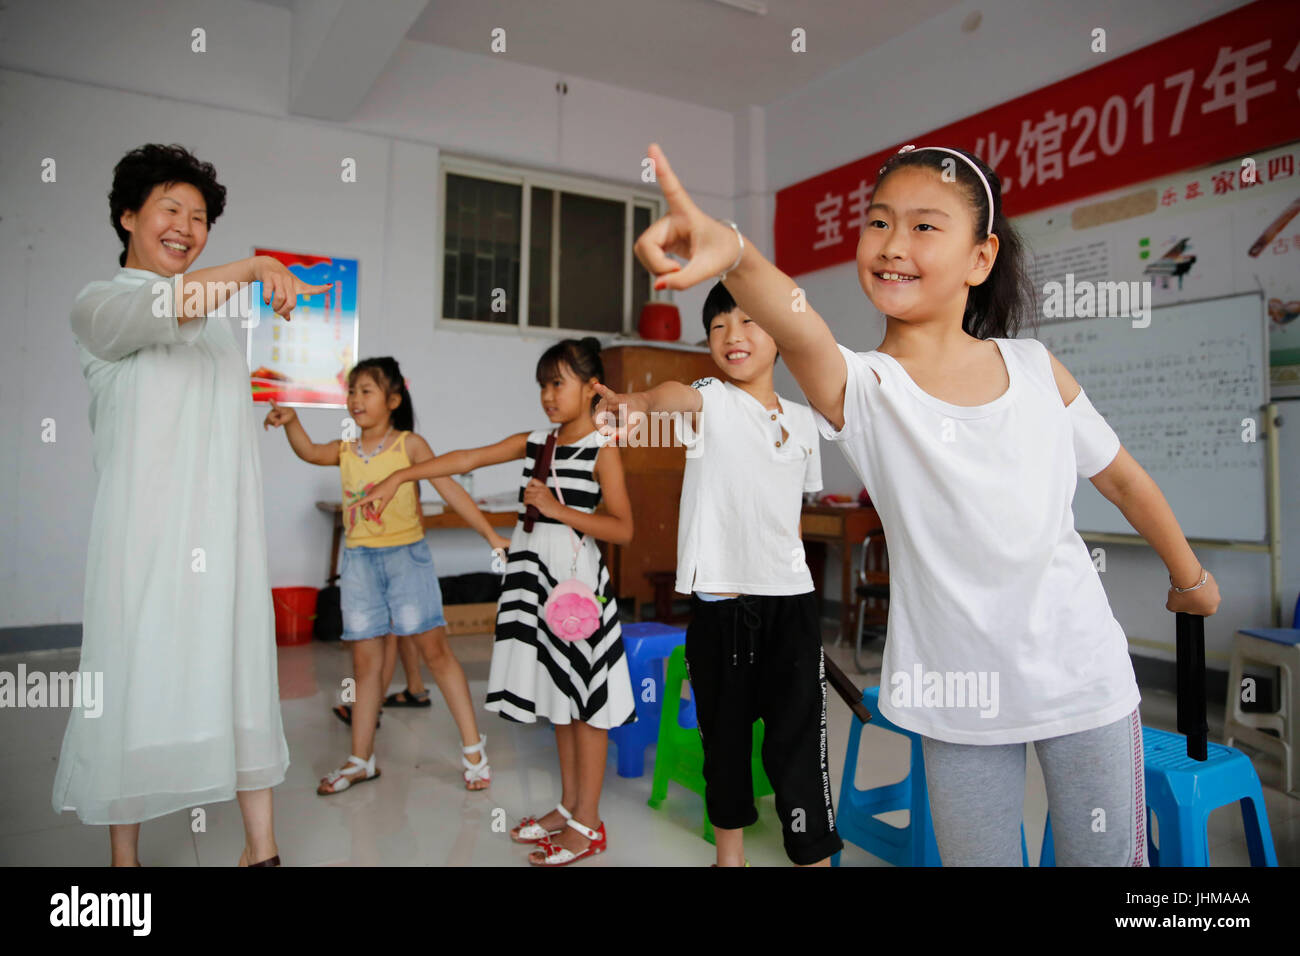 (170714) -- BAOFENG, July 14, 2017 (Xinhua) -- Children learn 'Henan Zhuizi', an art form of ballad-singing at the cultural center of Baofeng County, central China's Henan Province, July 14, 2017. The public classes for children are held by the cultural center of Baofeng County during every summer vacation since 2011, which include classes for musical instruments, dance and opera. (Xinhua/He Wuchang) (xzy) Stock Photo